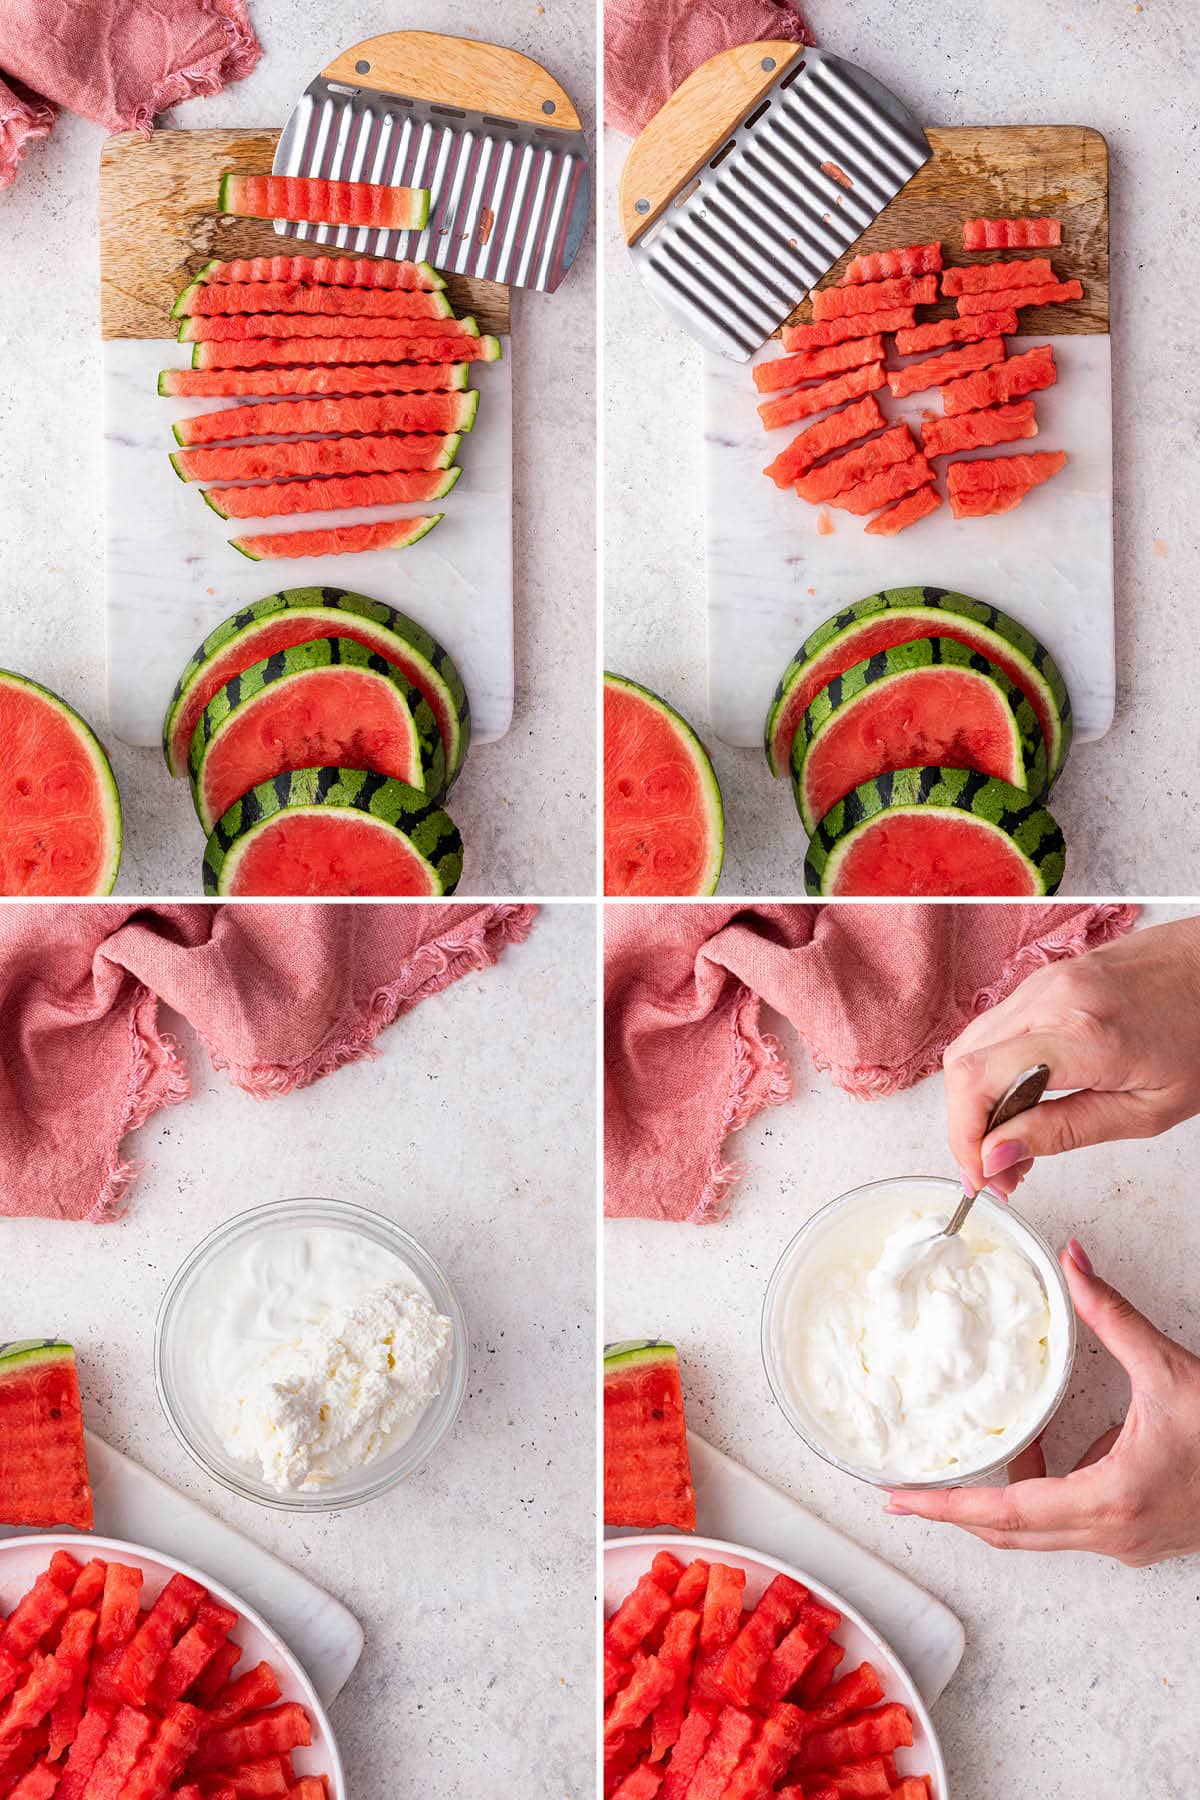 Collage of four photos showing how to make Watermelon Fries: crinkle cutting watermelon into fry shapes, and then stirring together yogurt and whipped topping to make a fruit dip.